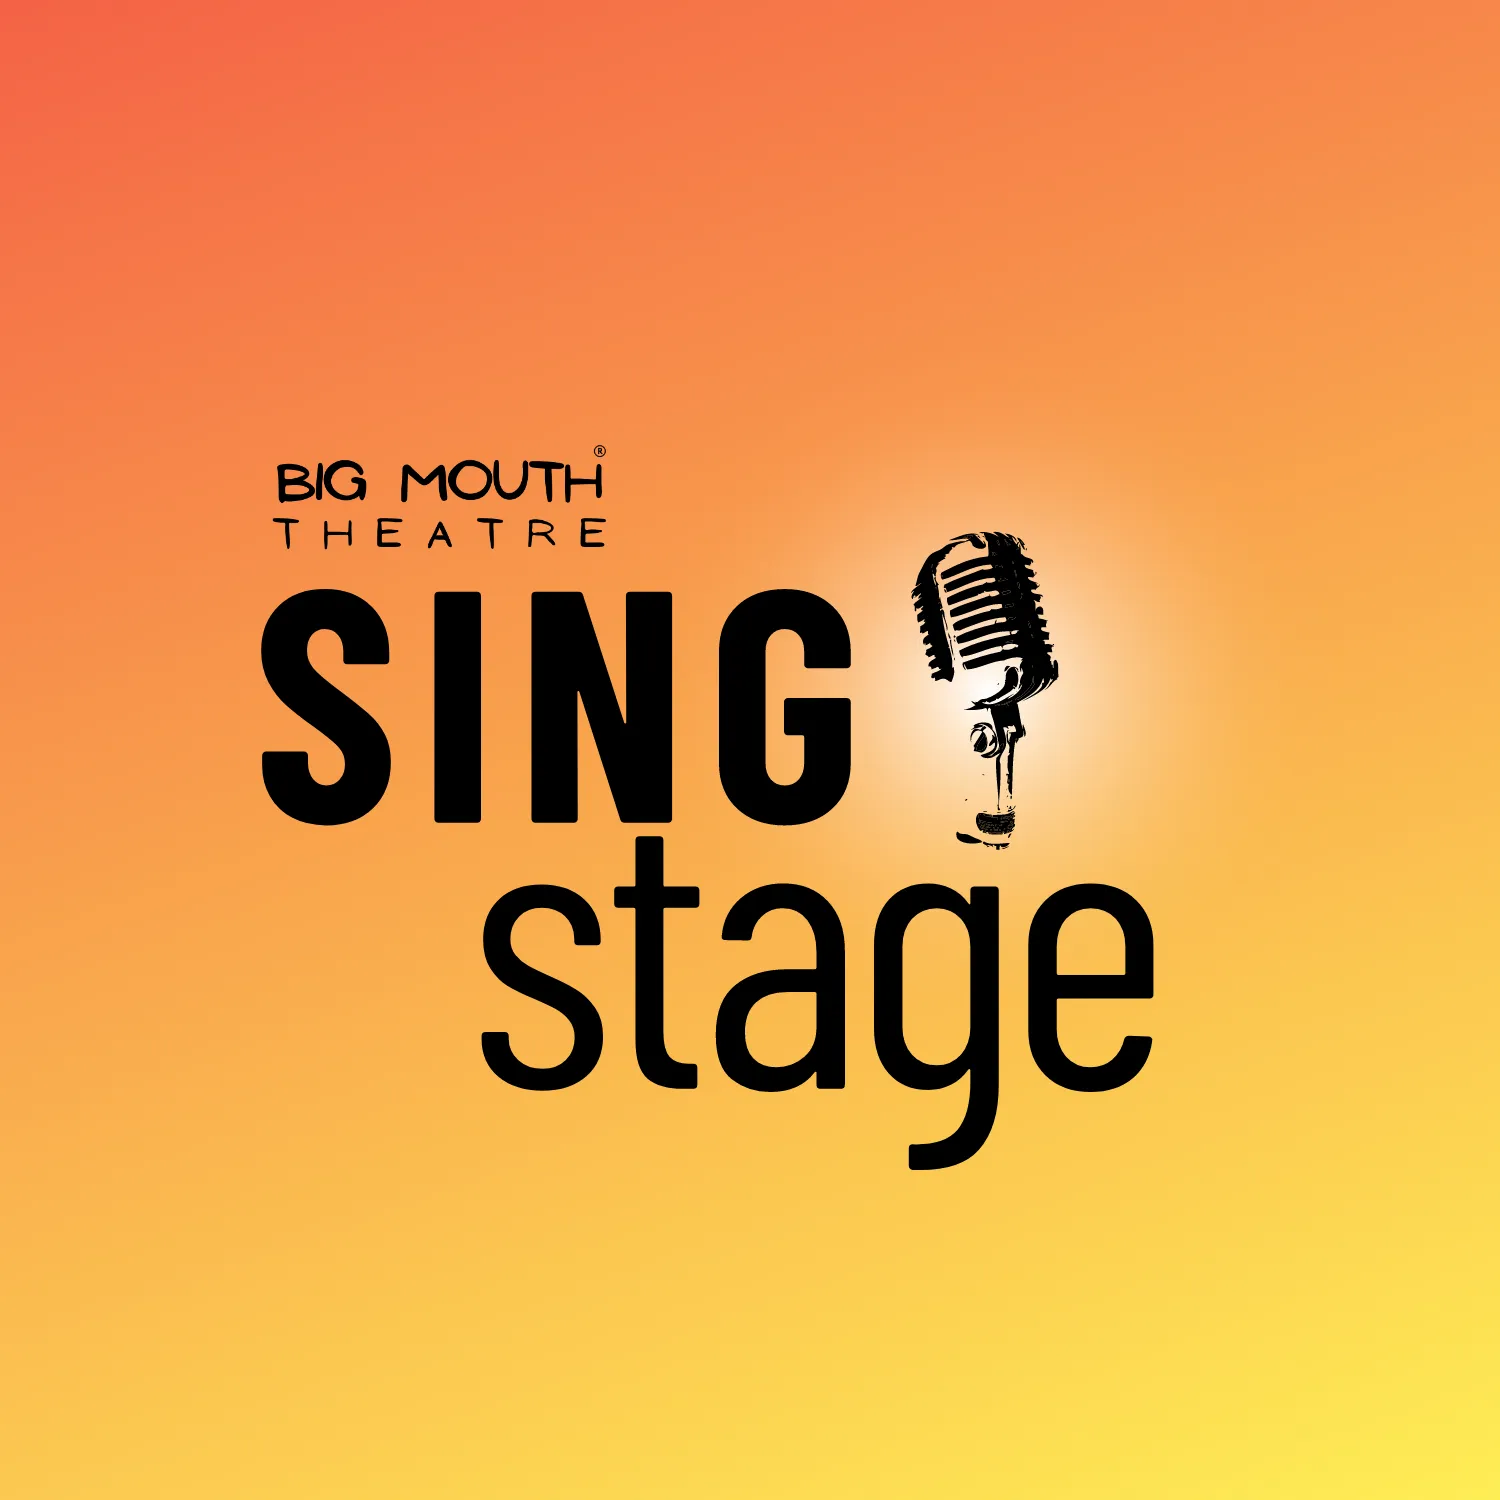 Big Mouth Theatre SINGstage logo